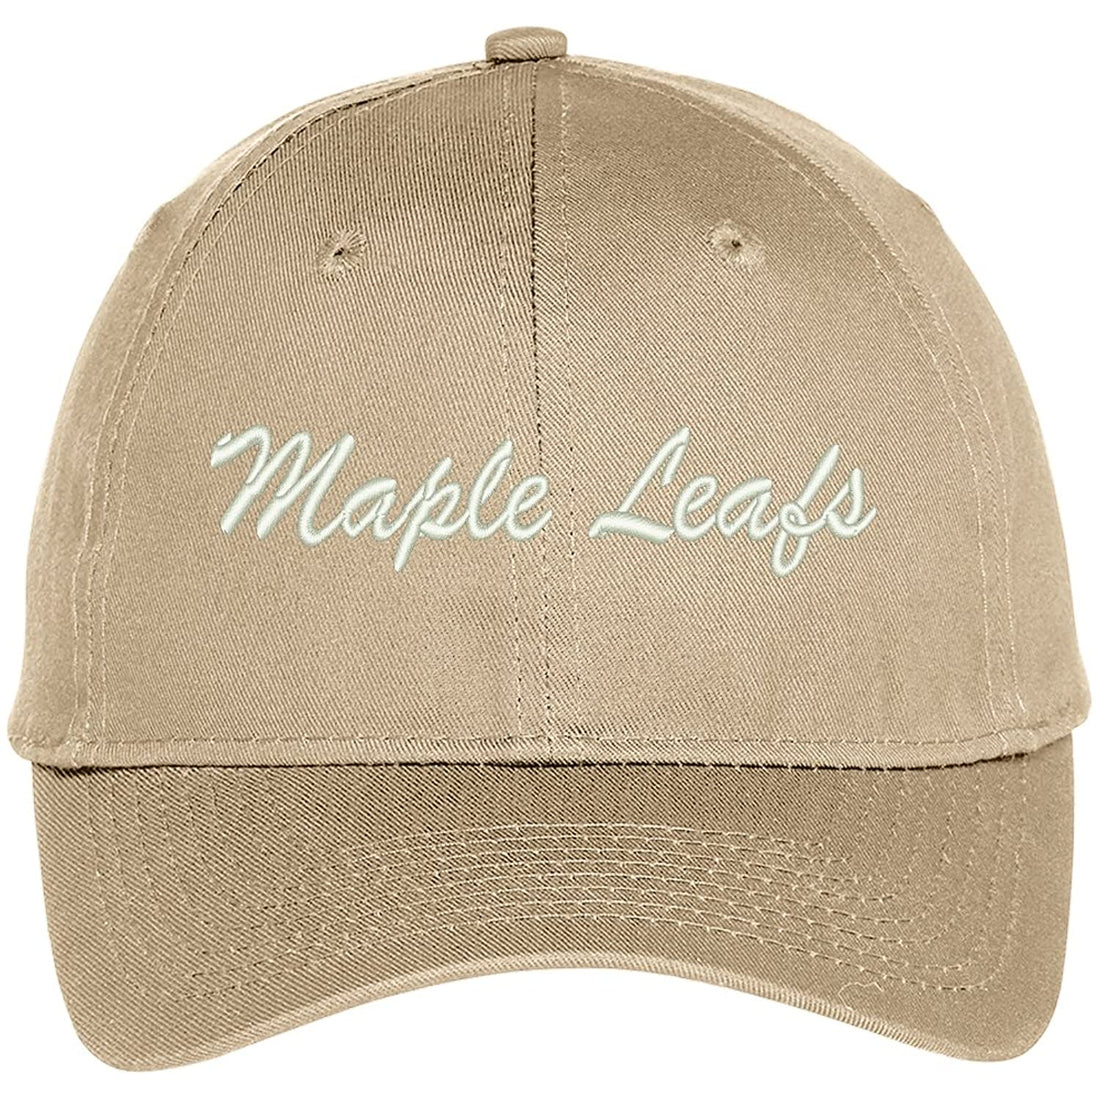 Trendy Apparel Shop Maple Leafs Embroidered Precurved Adjustable Cap